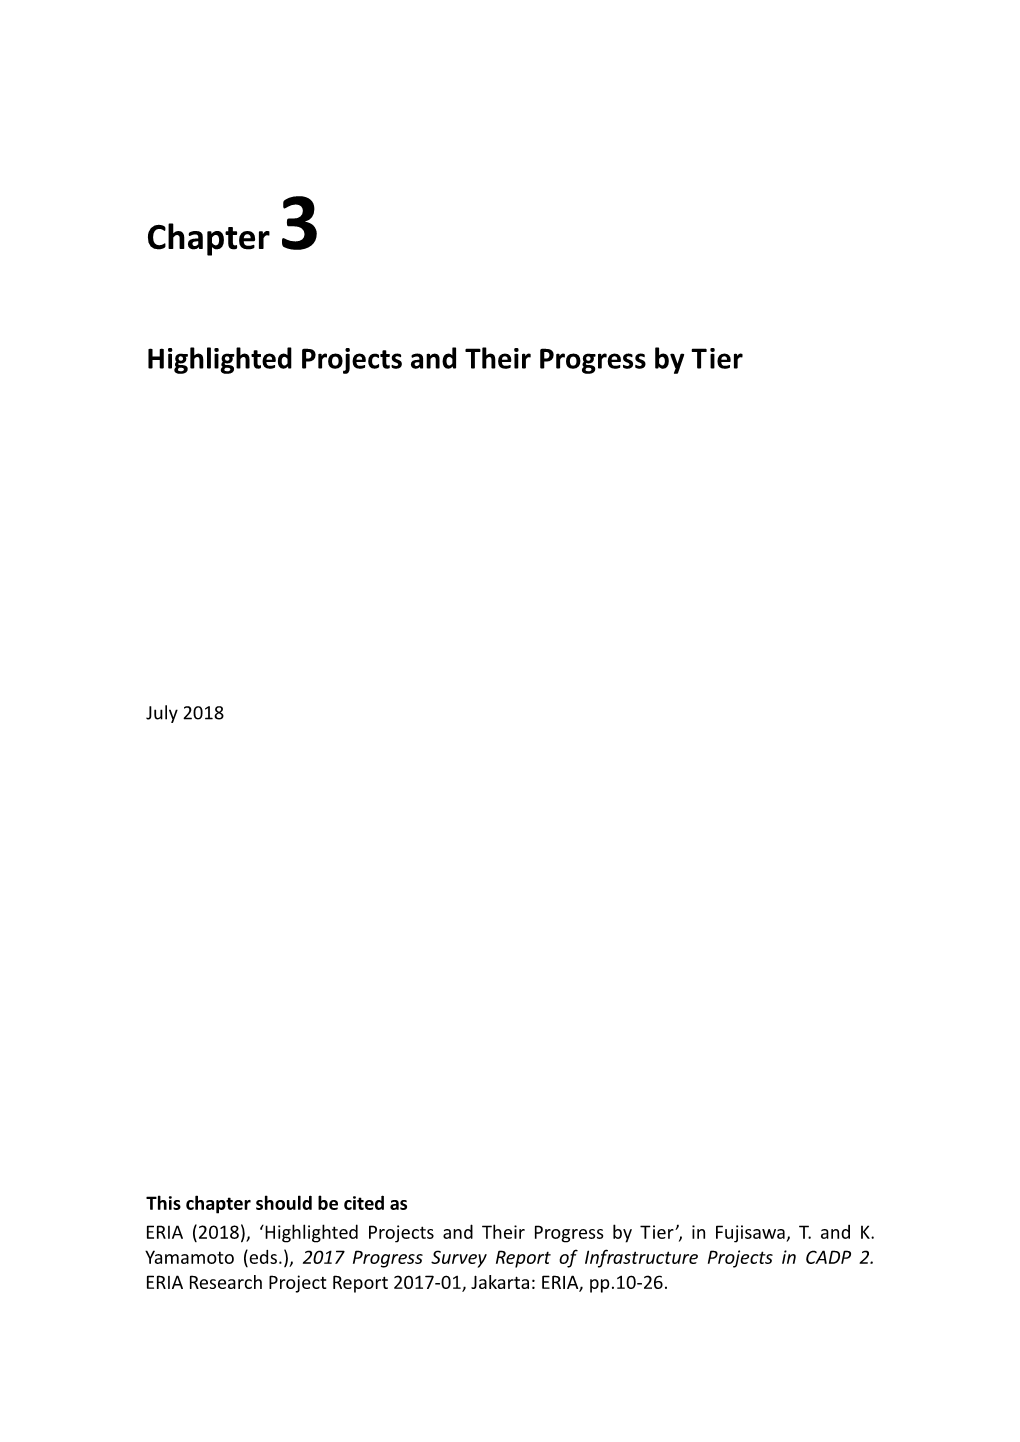 Chapter 3. Highlighted Projects and Their Progress by Tier